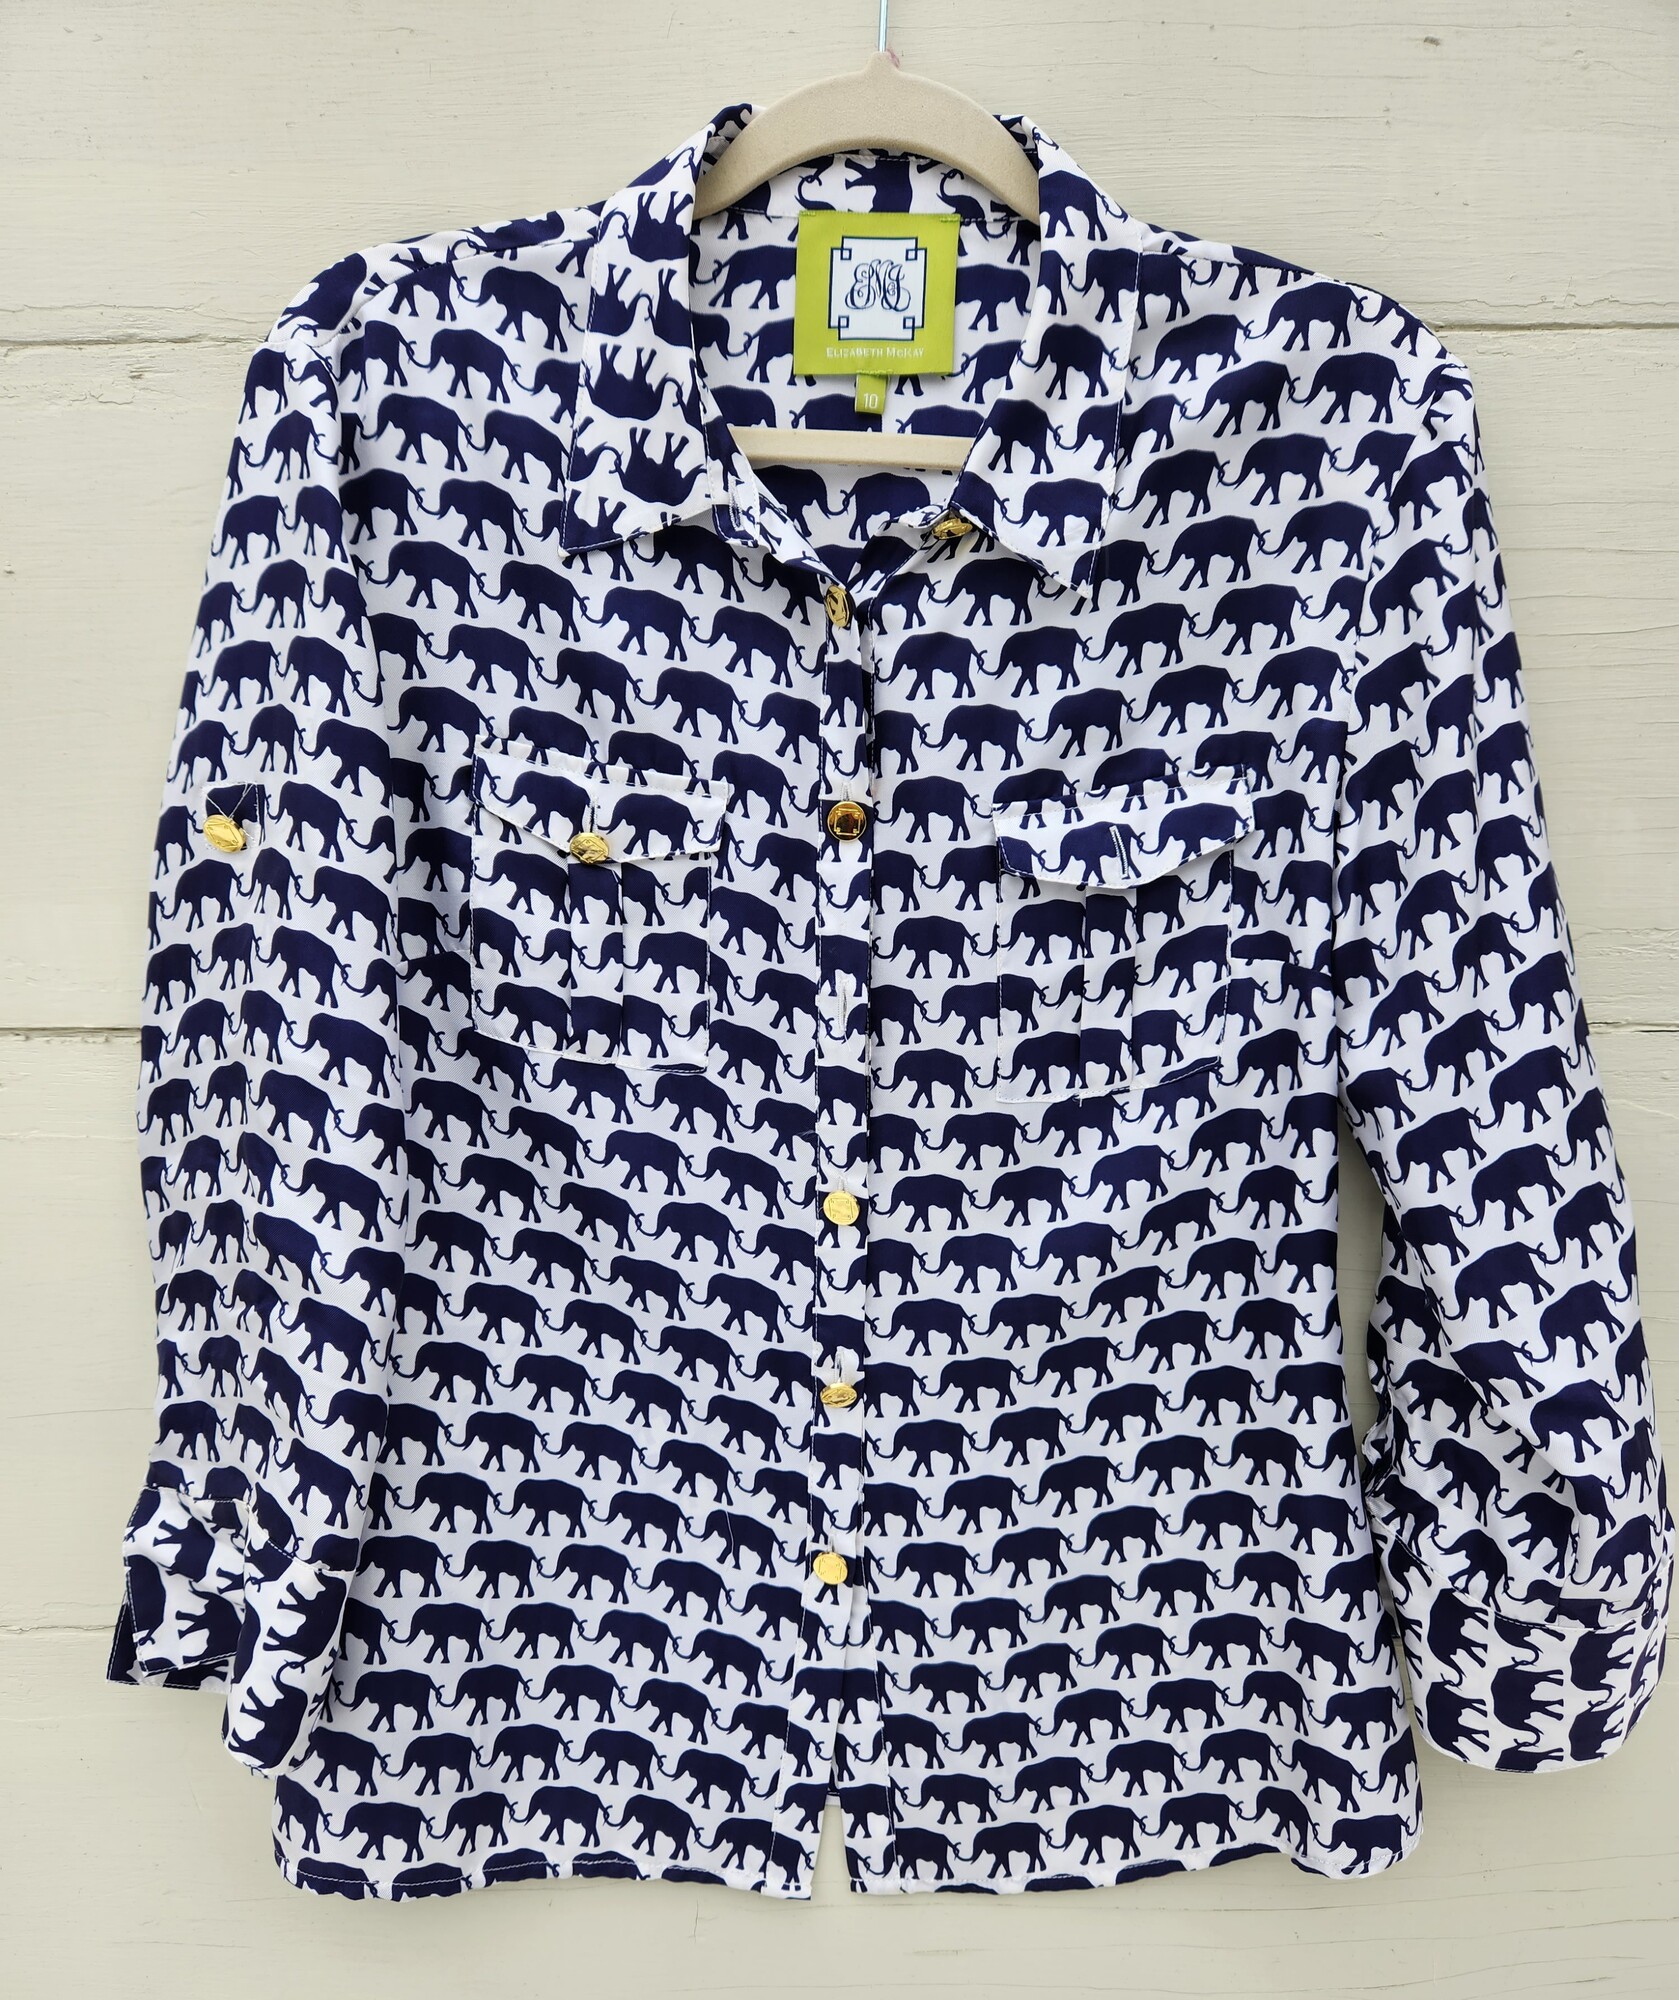 Elizabeth McKay Silk Navy Blouse Elephant motif size 10
Pit to Pit 20.5 inches across
Pit down sleeve 14.5 inches
Waist 18 inches across
Down the back 26 inches
Sleeves can be rolled up and buttoned, Sides have 3 inch slits allowing it to be worn un-tucked
Missing top Button at the neck
EUC